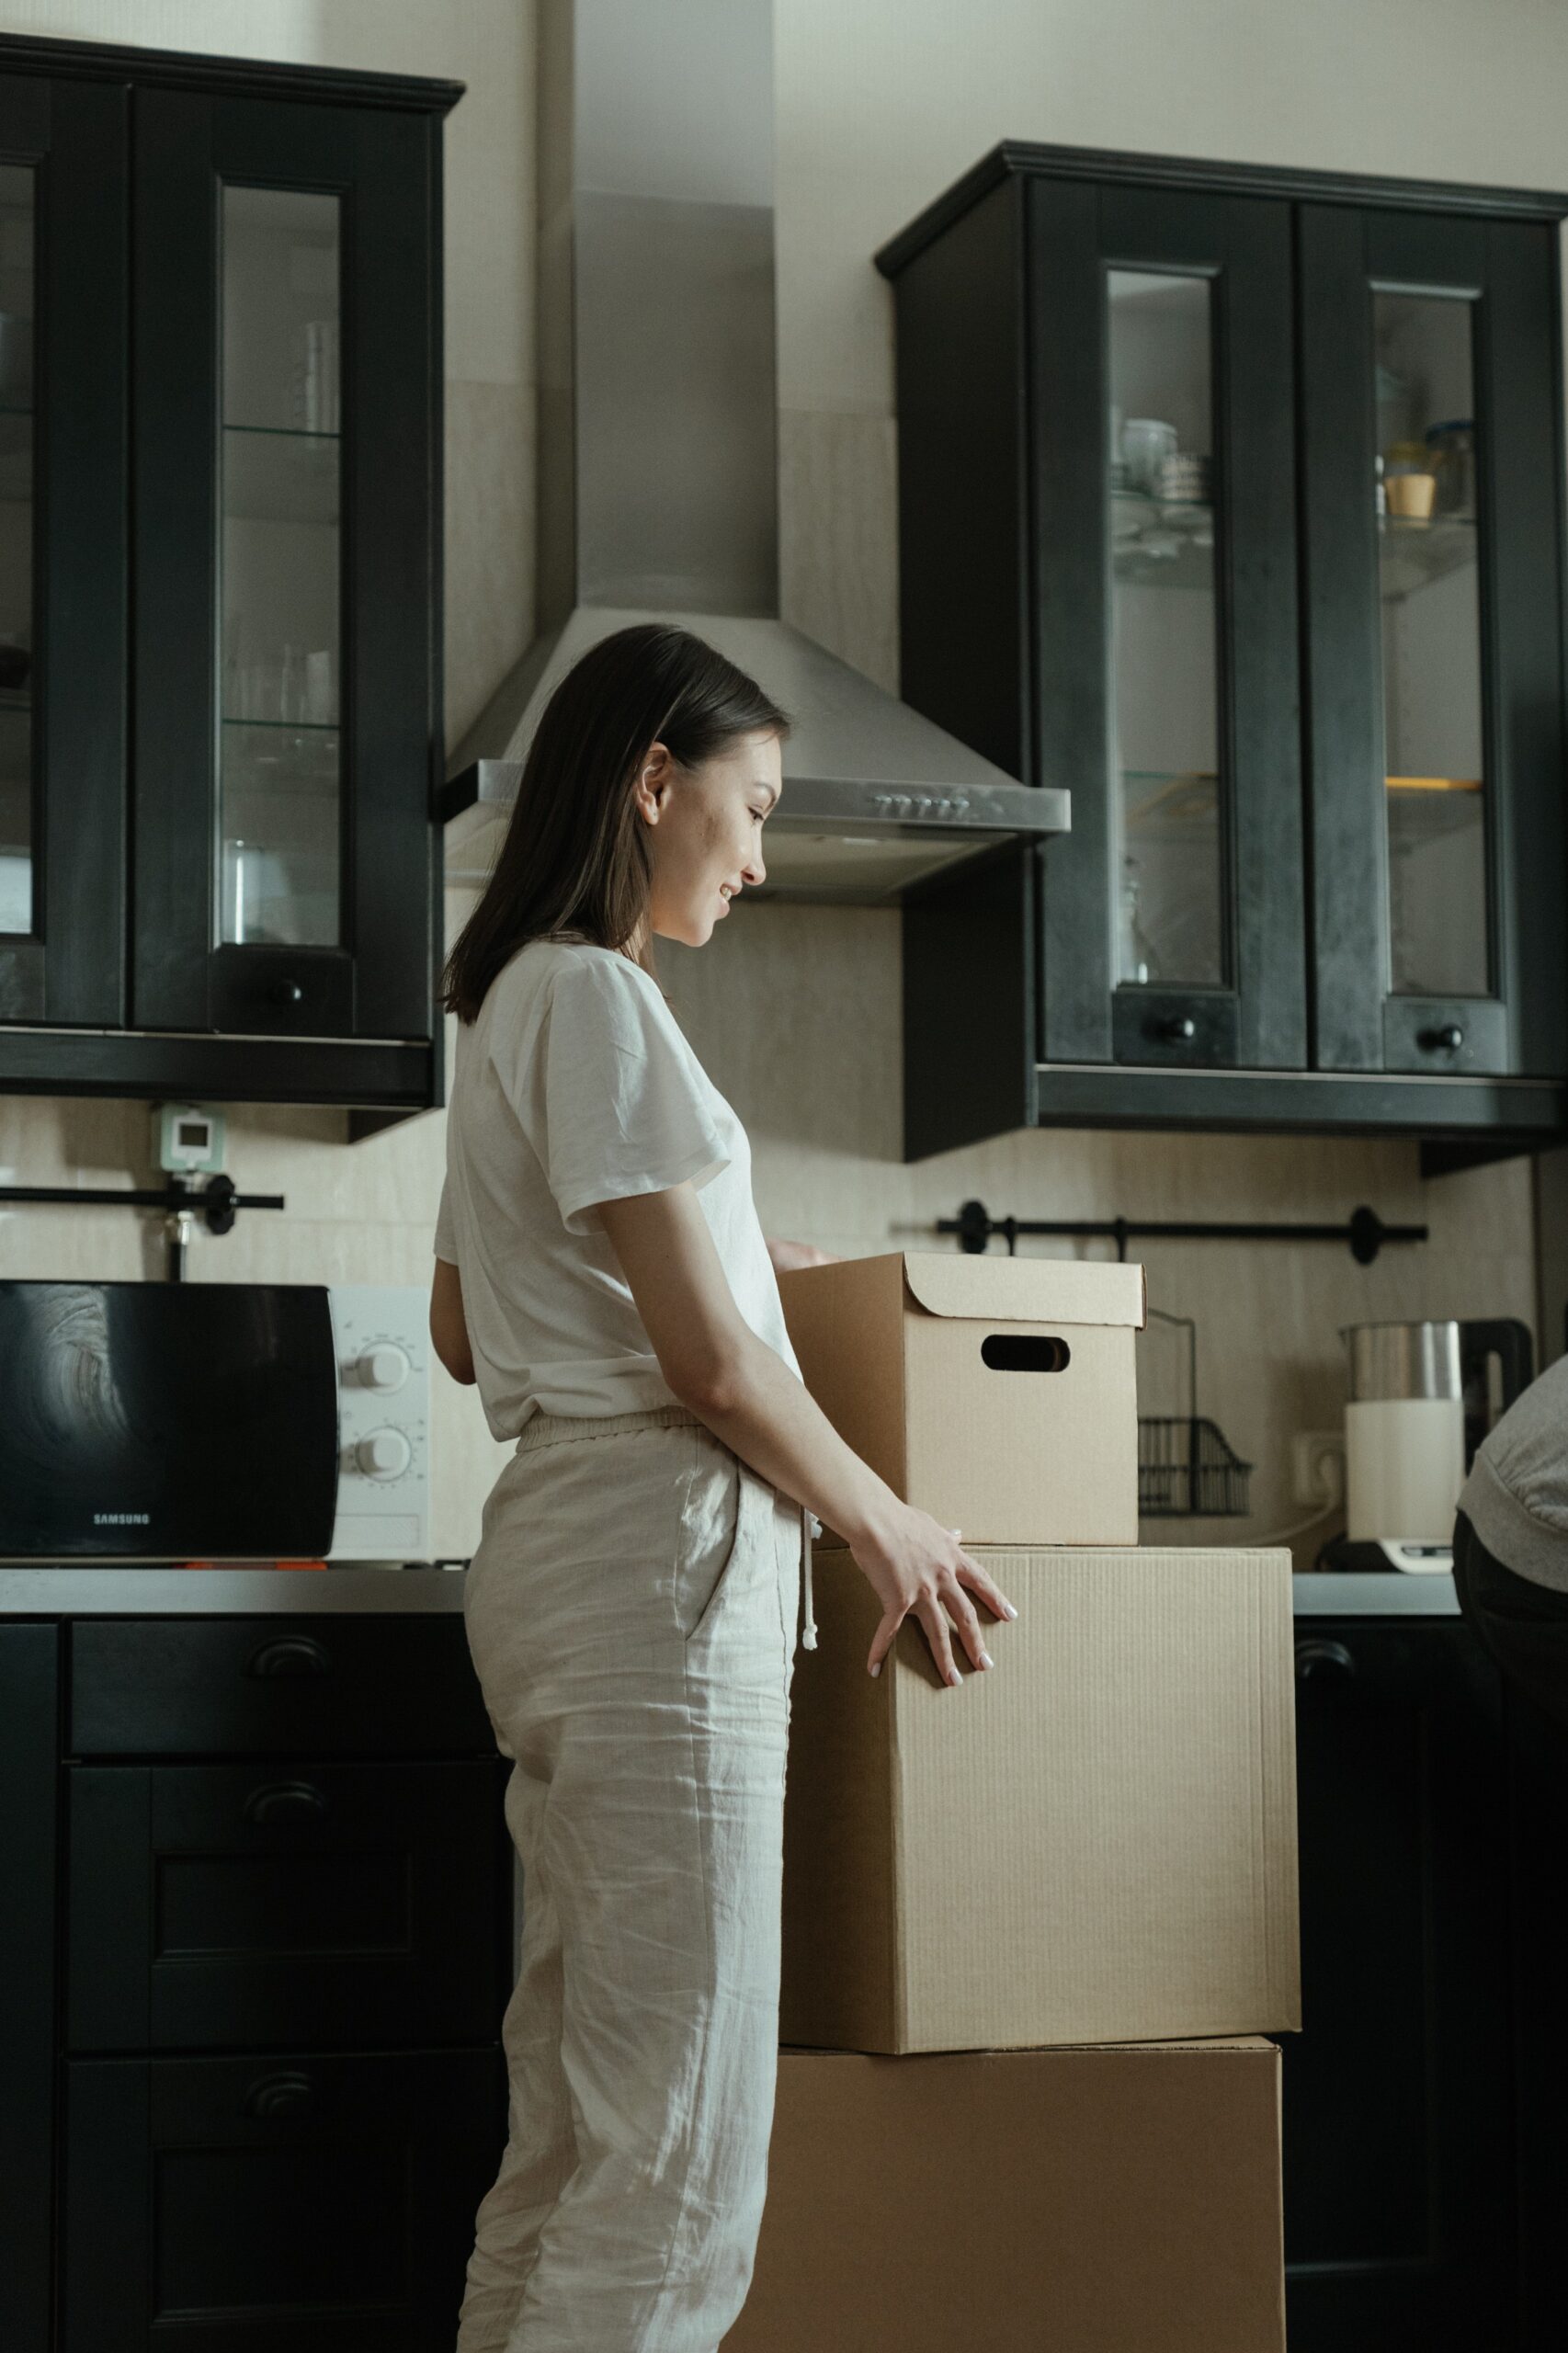 Woman standing in kitchen with boxes